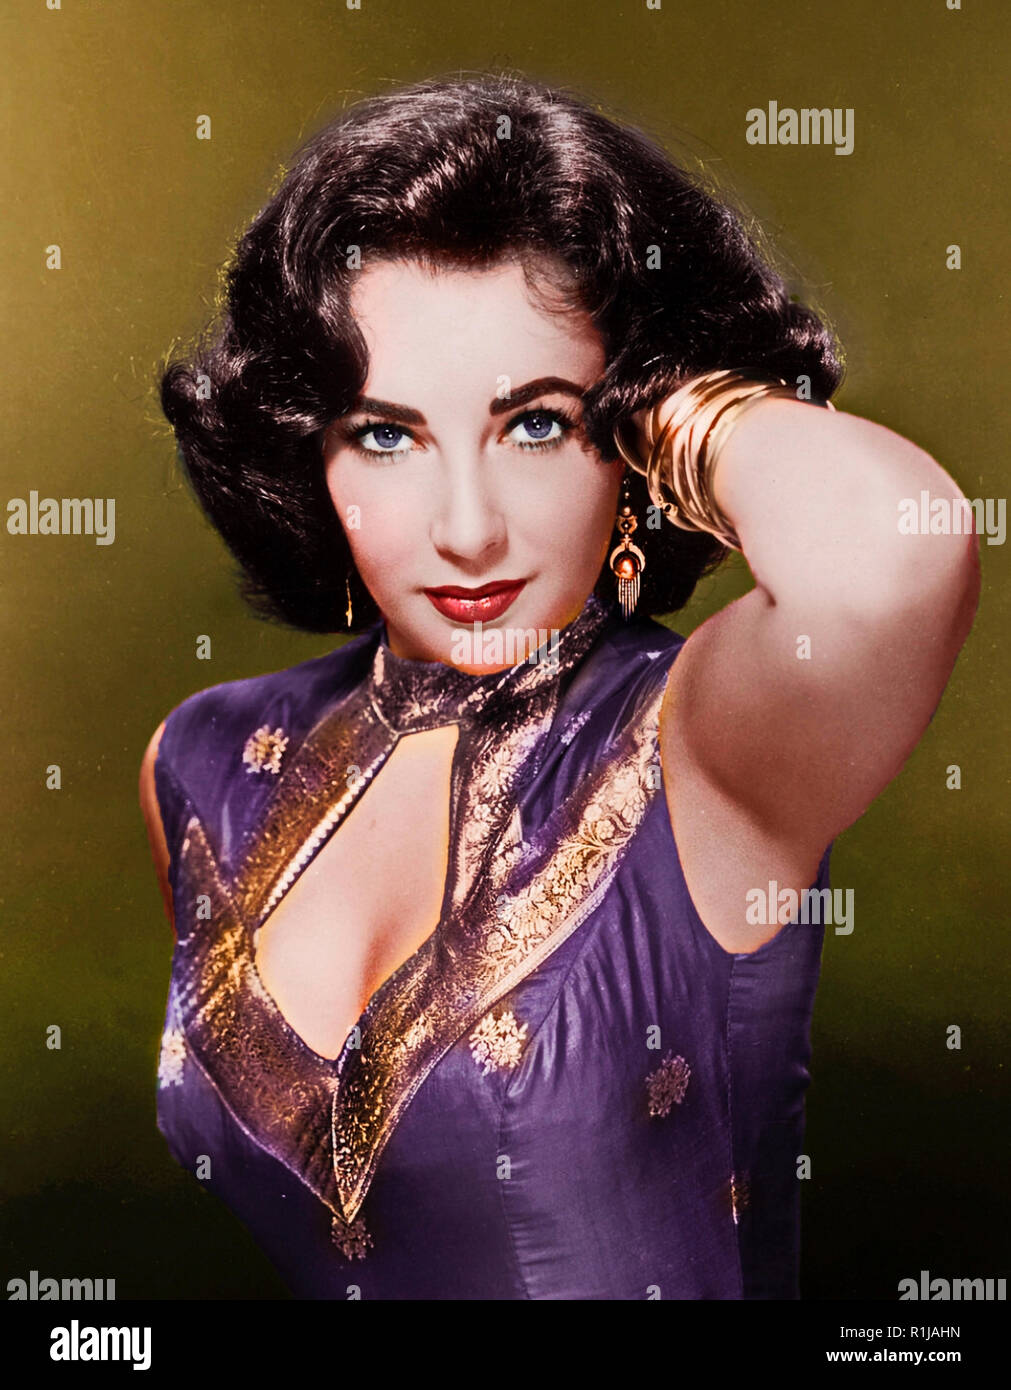 Dame Elizabeth Rosemond Taylor DBE (February 27, 1932 ñ March 23, 2011) was a British-born American actress, businesswoman, and humanitarian. She began her career as a child actress in the early 1940s, and was one of the most popular stars of classical Hollywood cinema in the 1950s. She continued her career successfully into the 1960s, and remained a well-known public figure for the rest of her life. In 1999, the American Film Institute named her the seventh-greatest female screen legend. Credit: Hollywood Photo Archive / MediaPunch Stock Photo